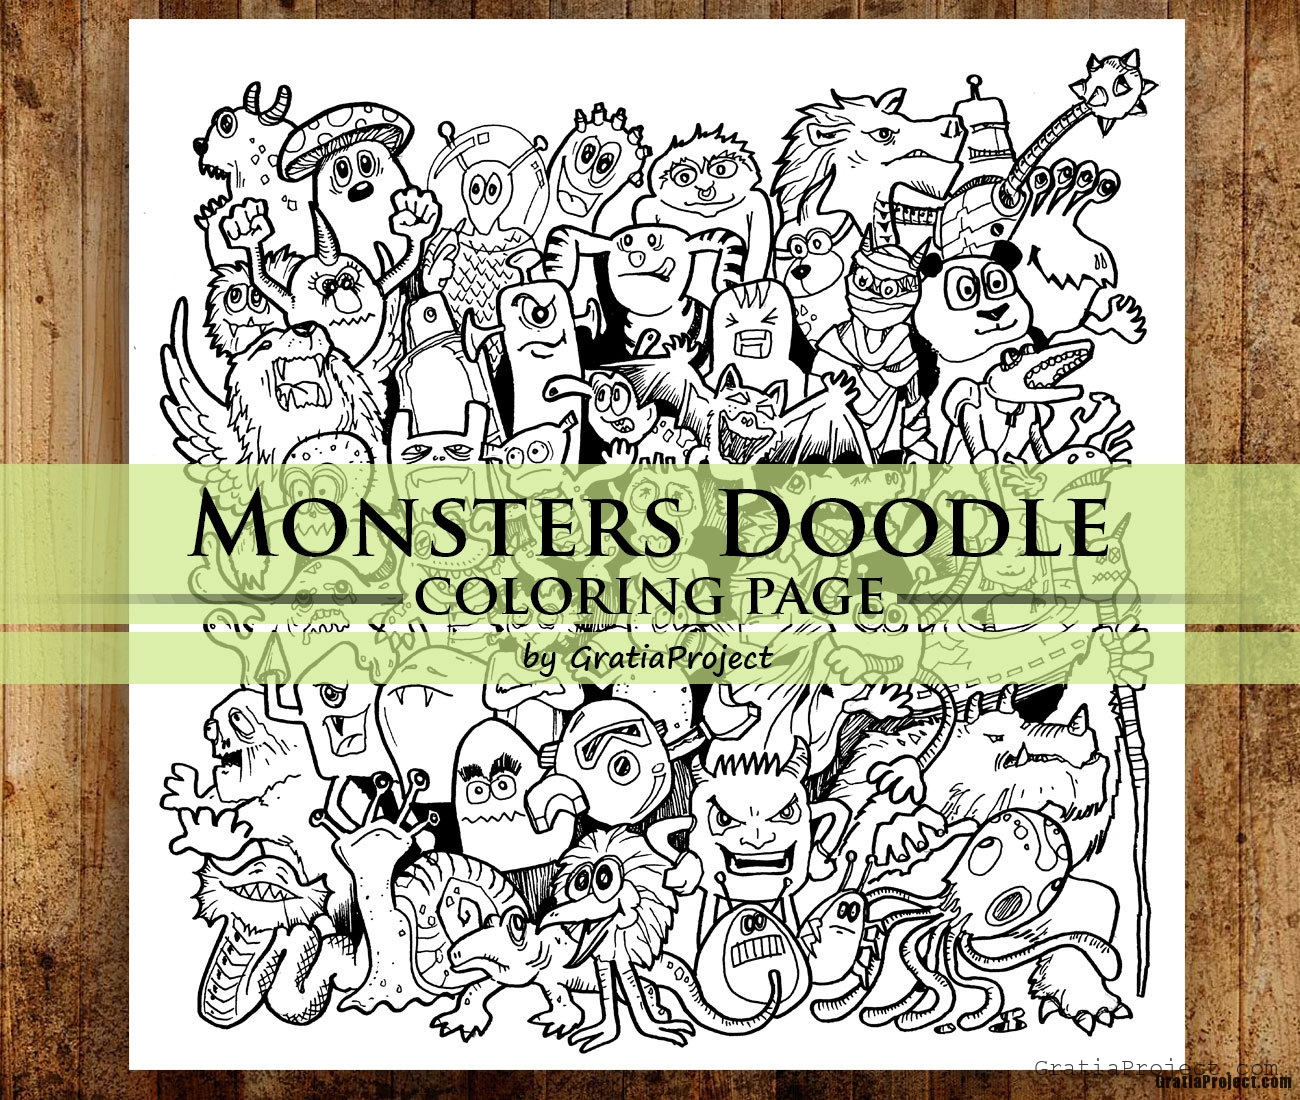 Monsters Doodle Coloring Page Adult